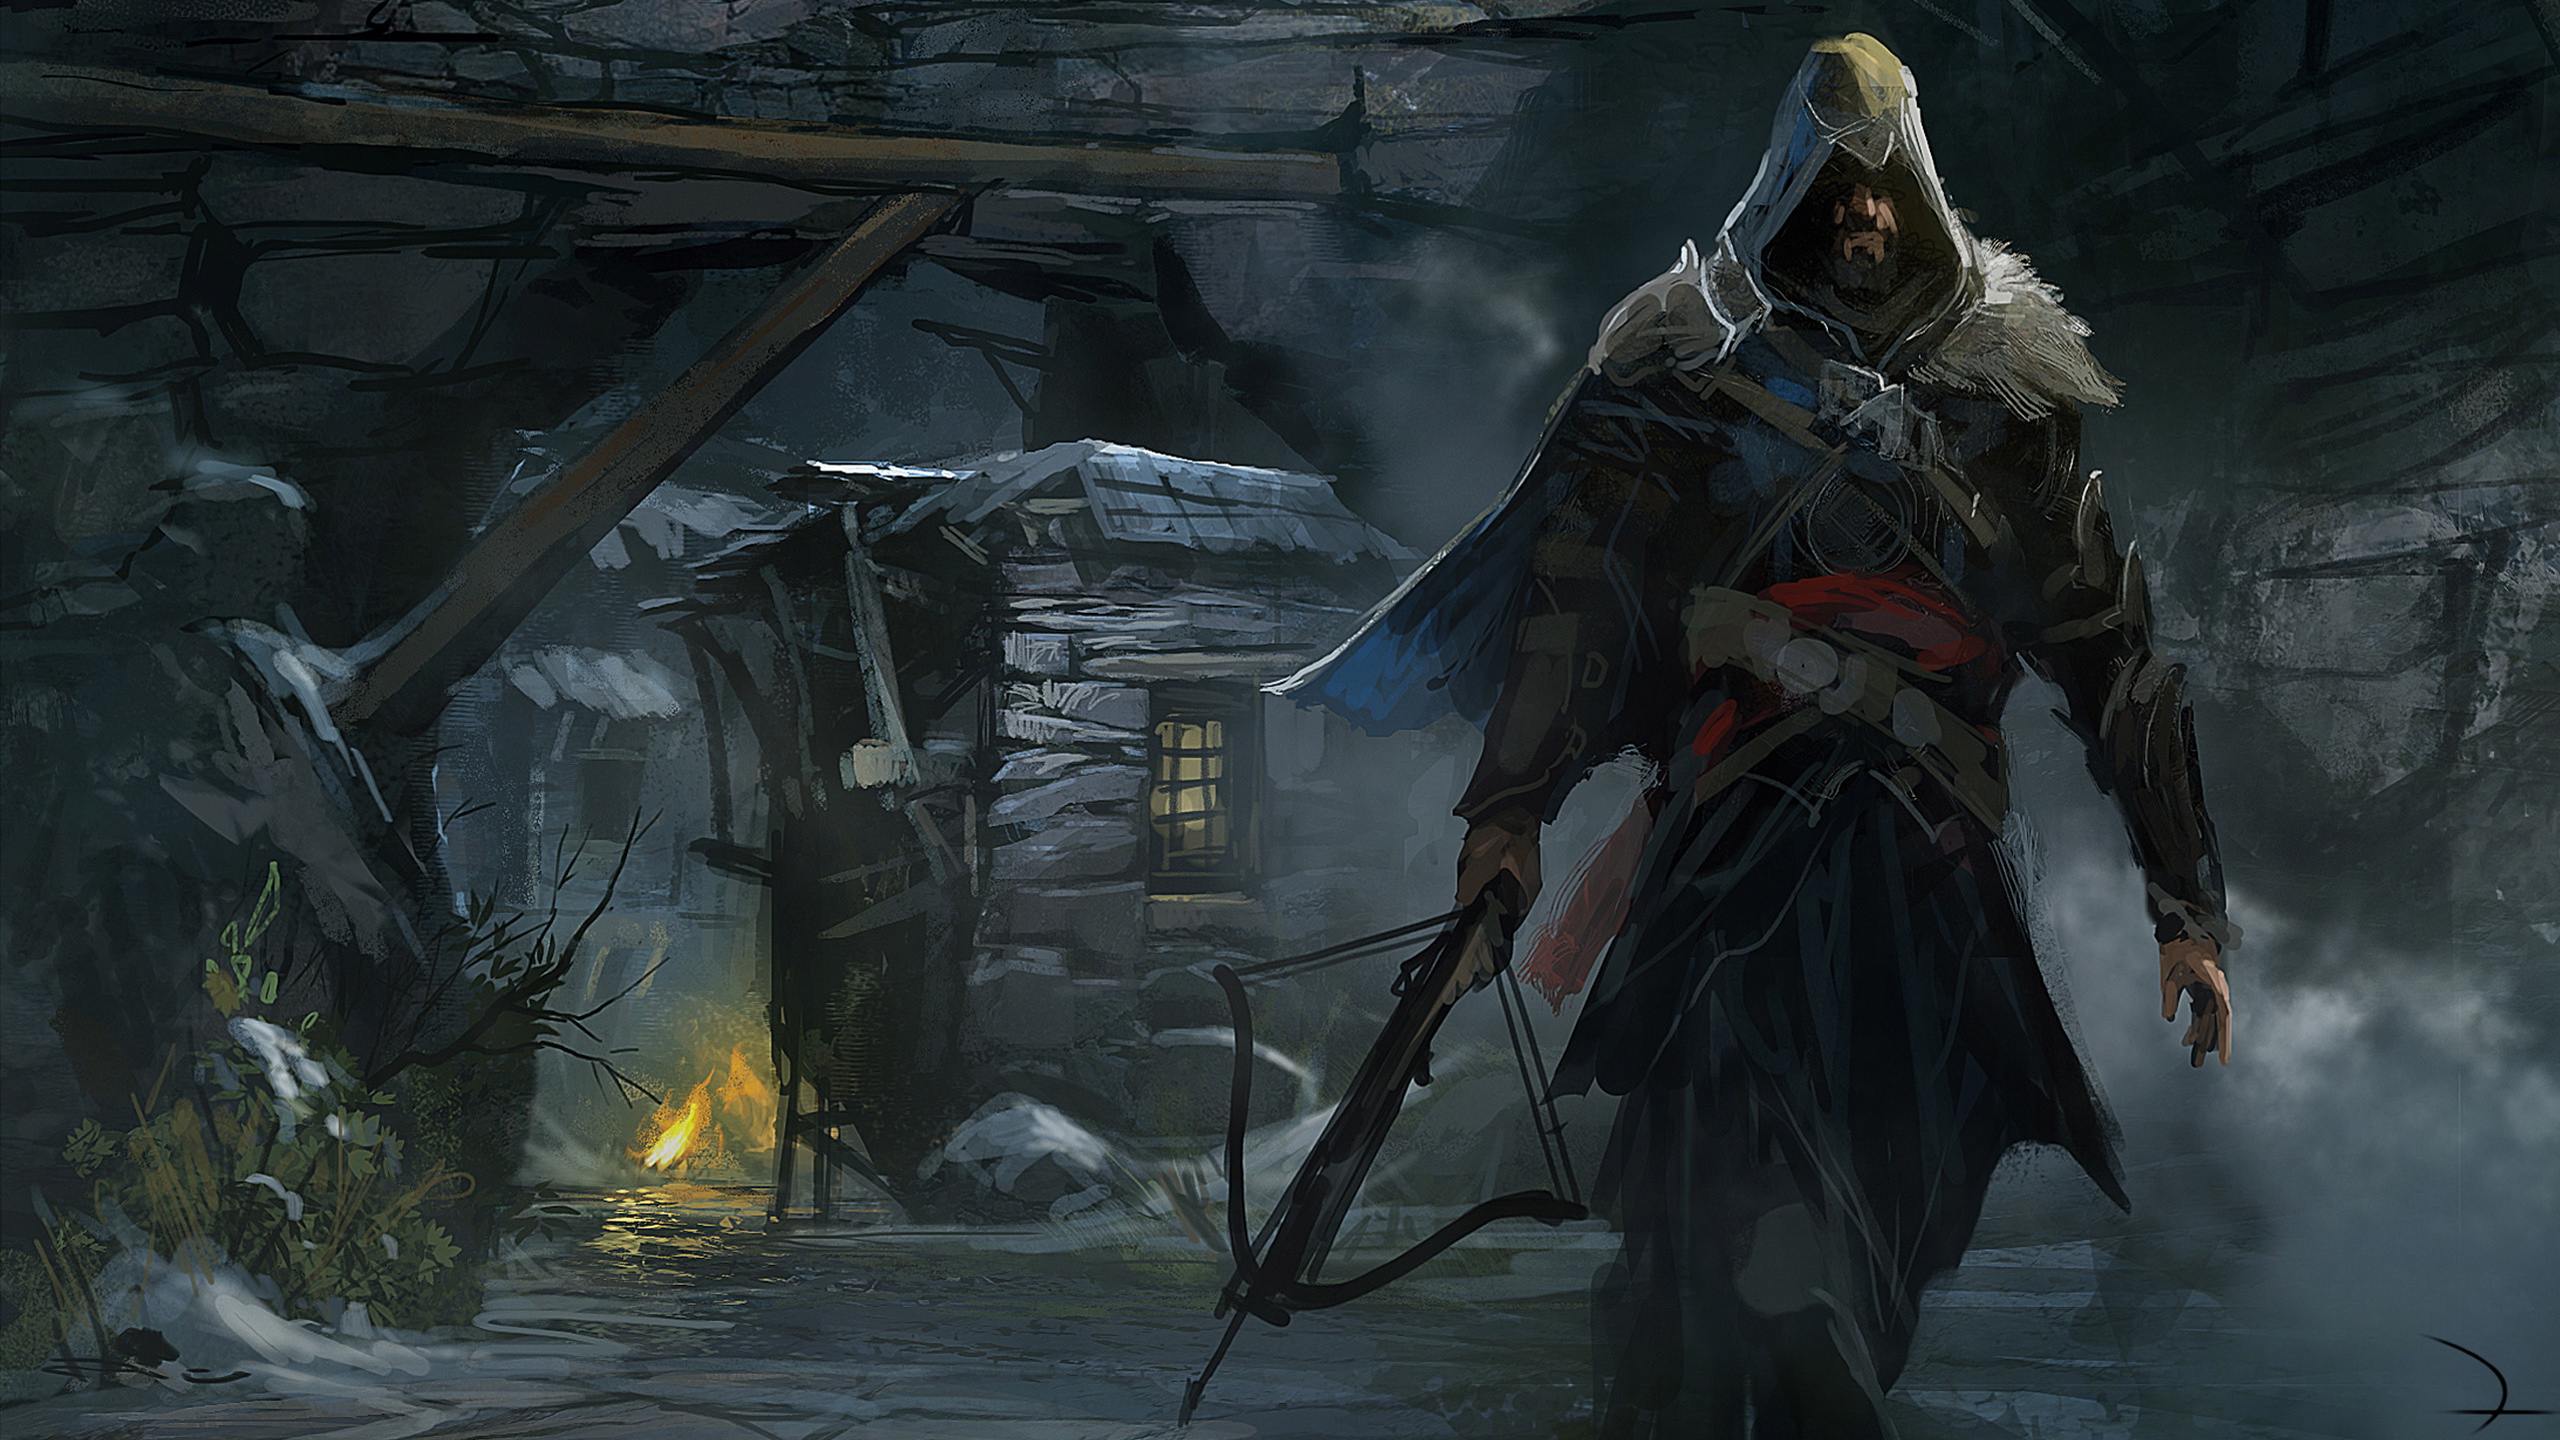 video game, assassin's creed: revelations, assassin's creed